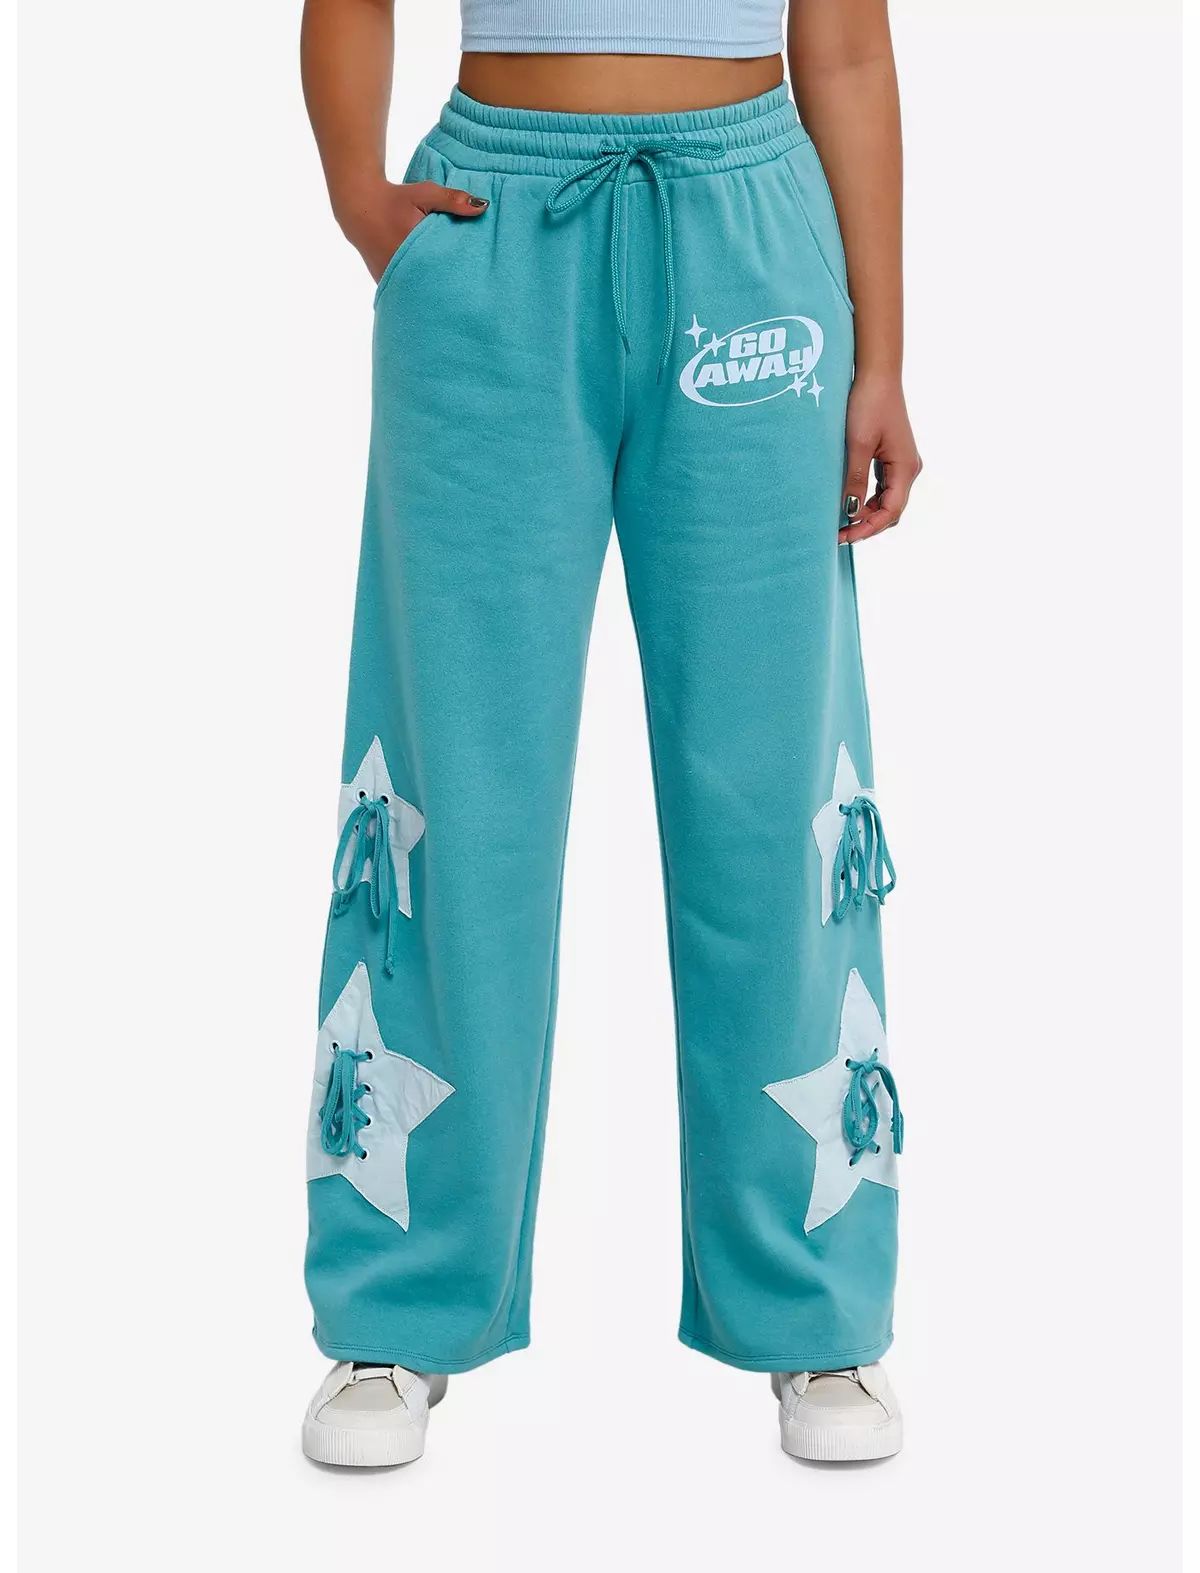 Sweet Society® Teal Star Lace-Up Wide Leg Girls Lounge Pants | Hot Topic